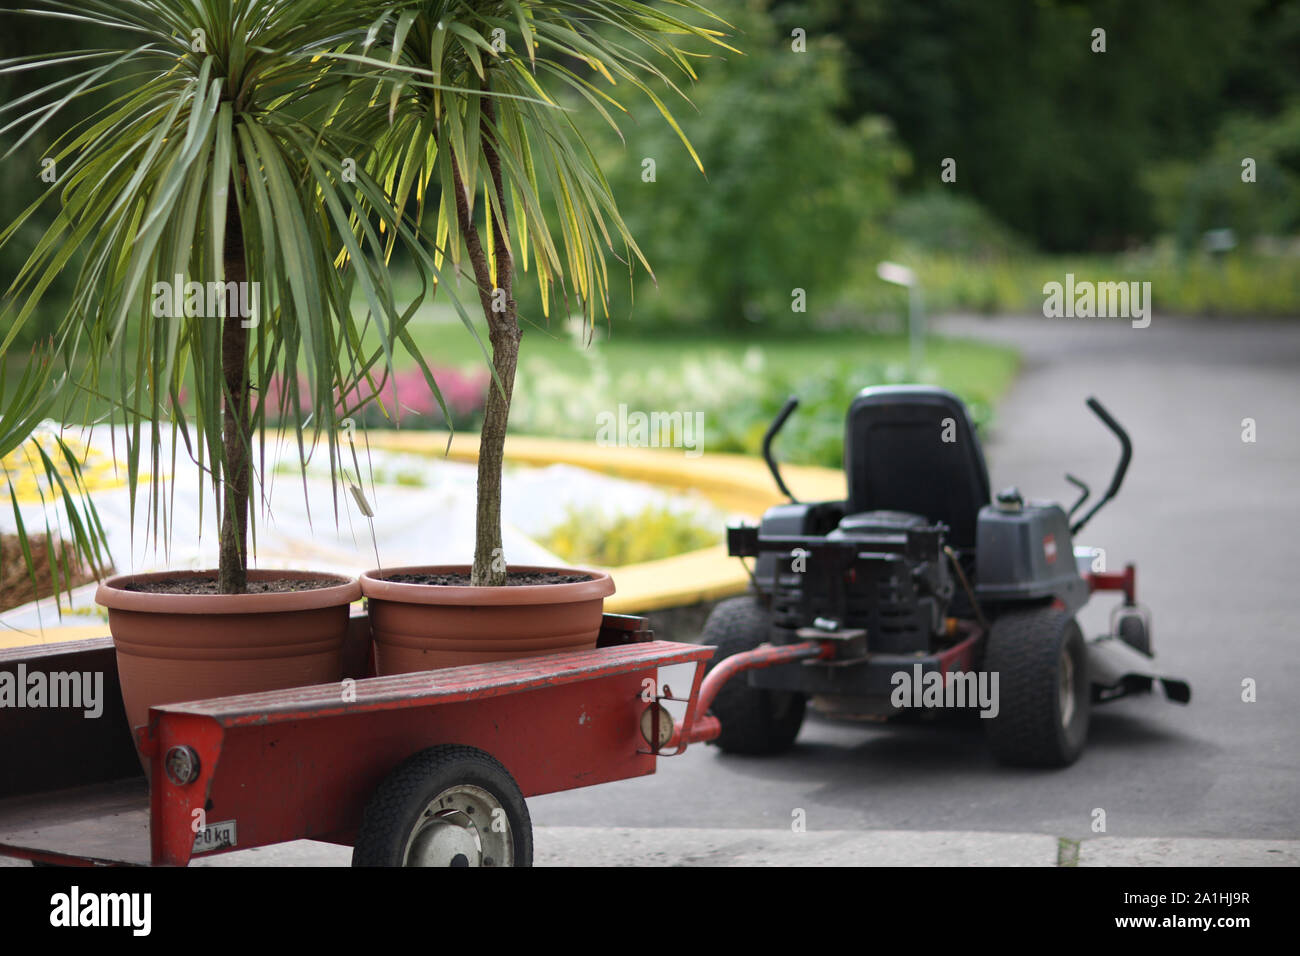 Electric car with a trailer with decorative palms in large pots Stock Photo